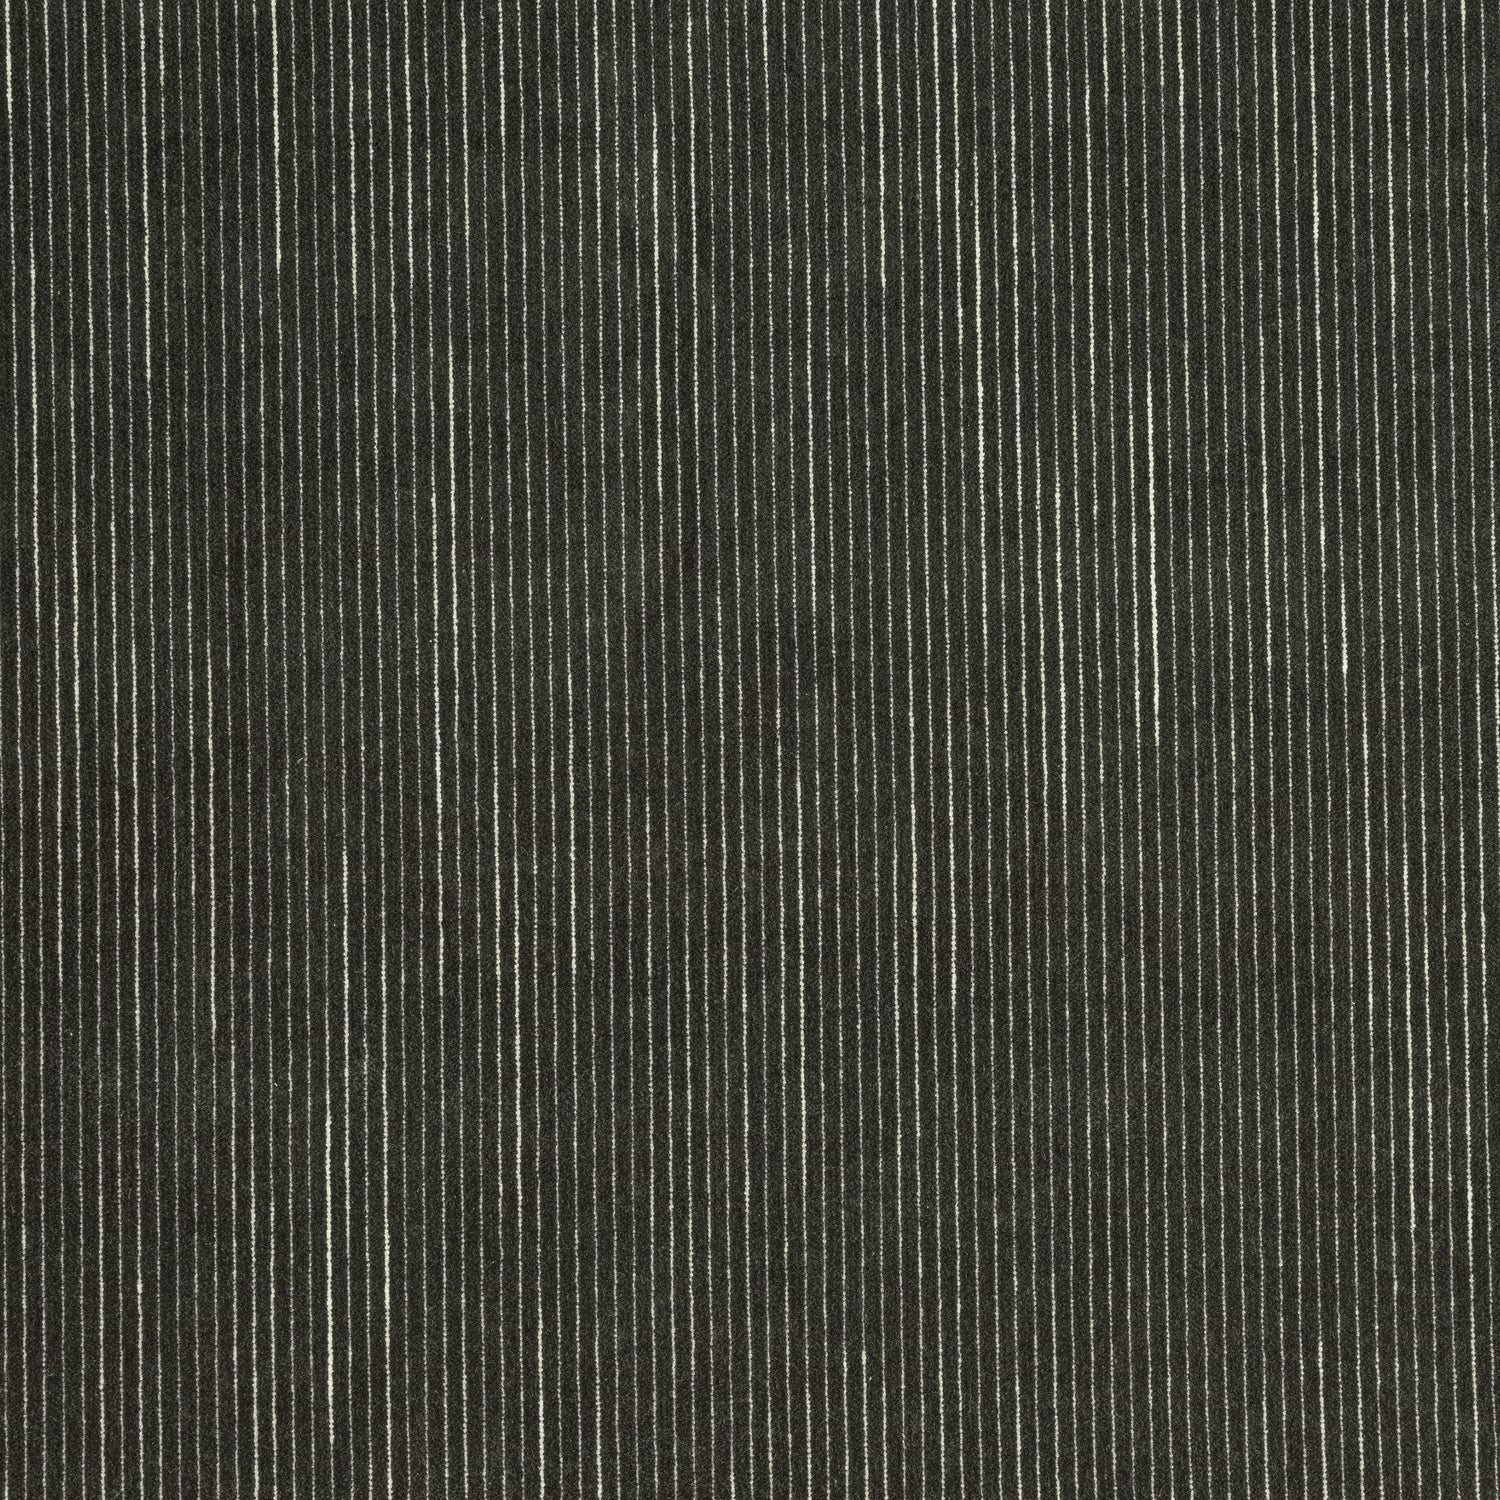 Fino Velvet fabric in smoke color - pattern number W8150 - by Thibaut in the Sereno collection